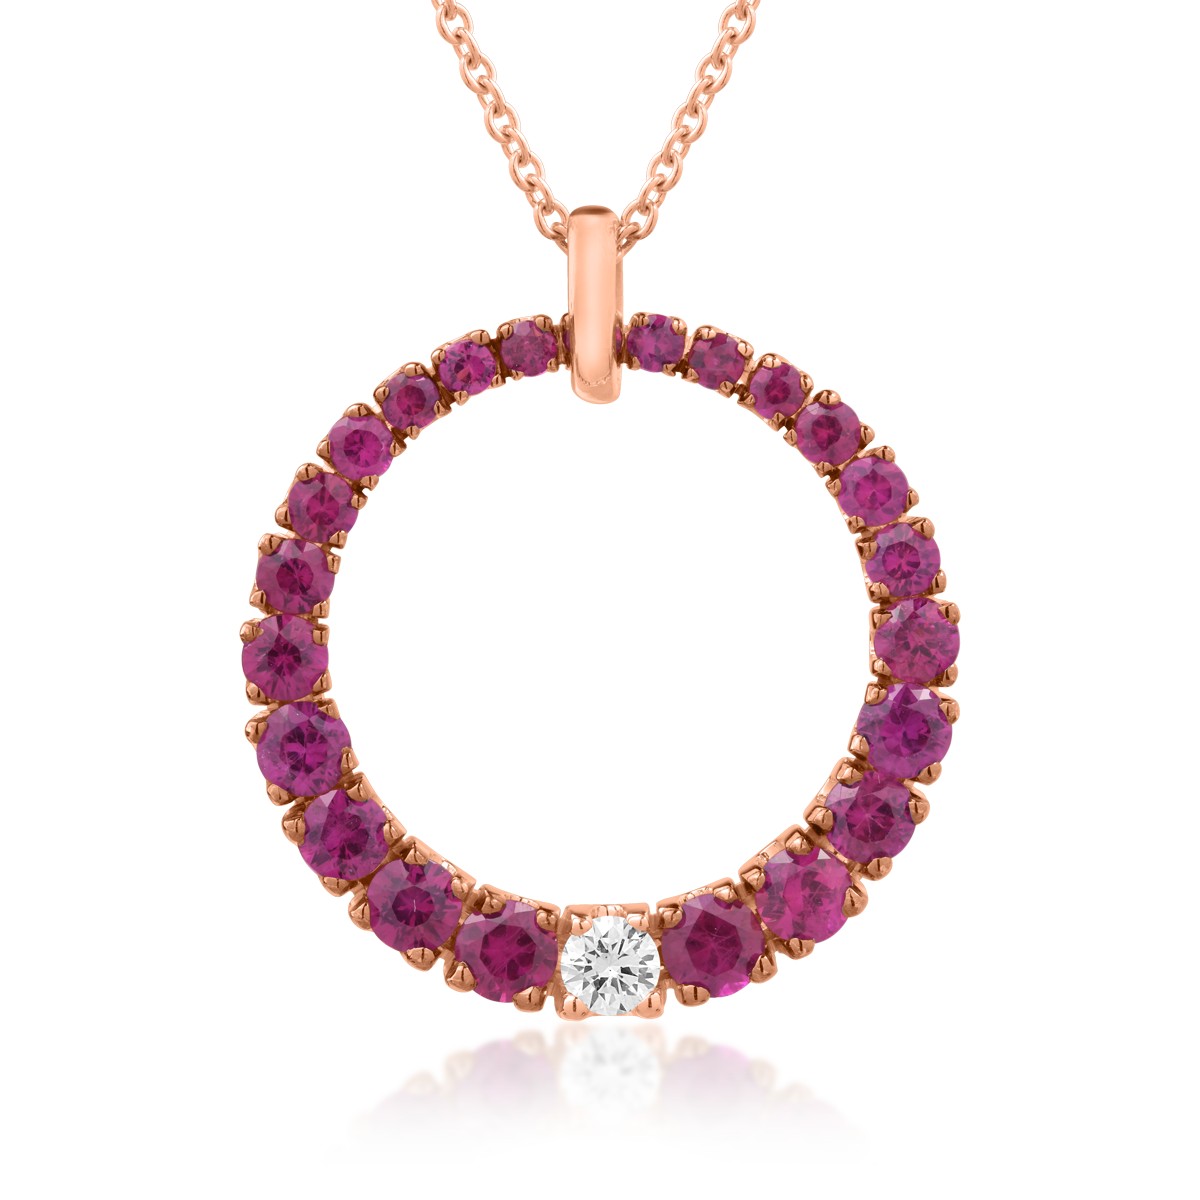 18K rose gold pendant necklace with 0.17ct diamond and 2.54ct ruby